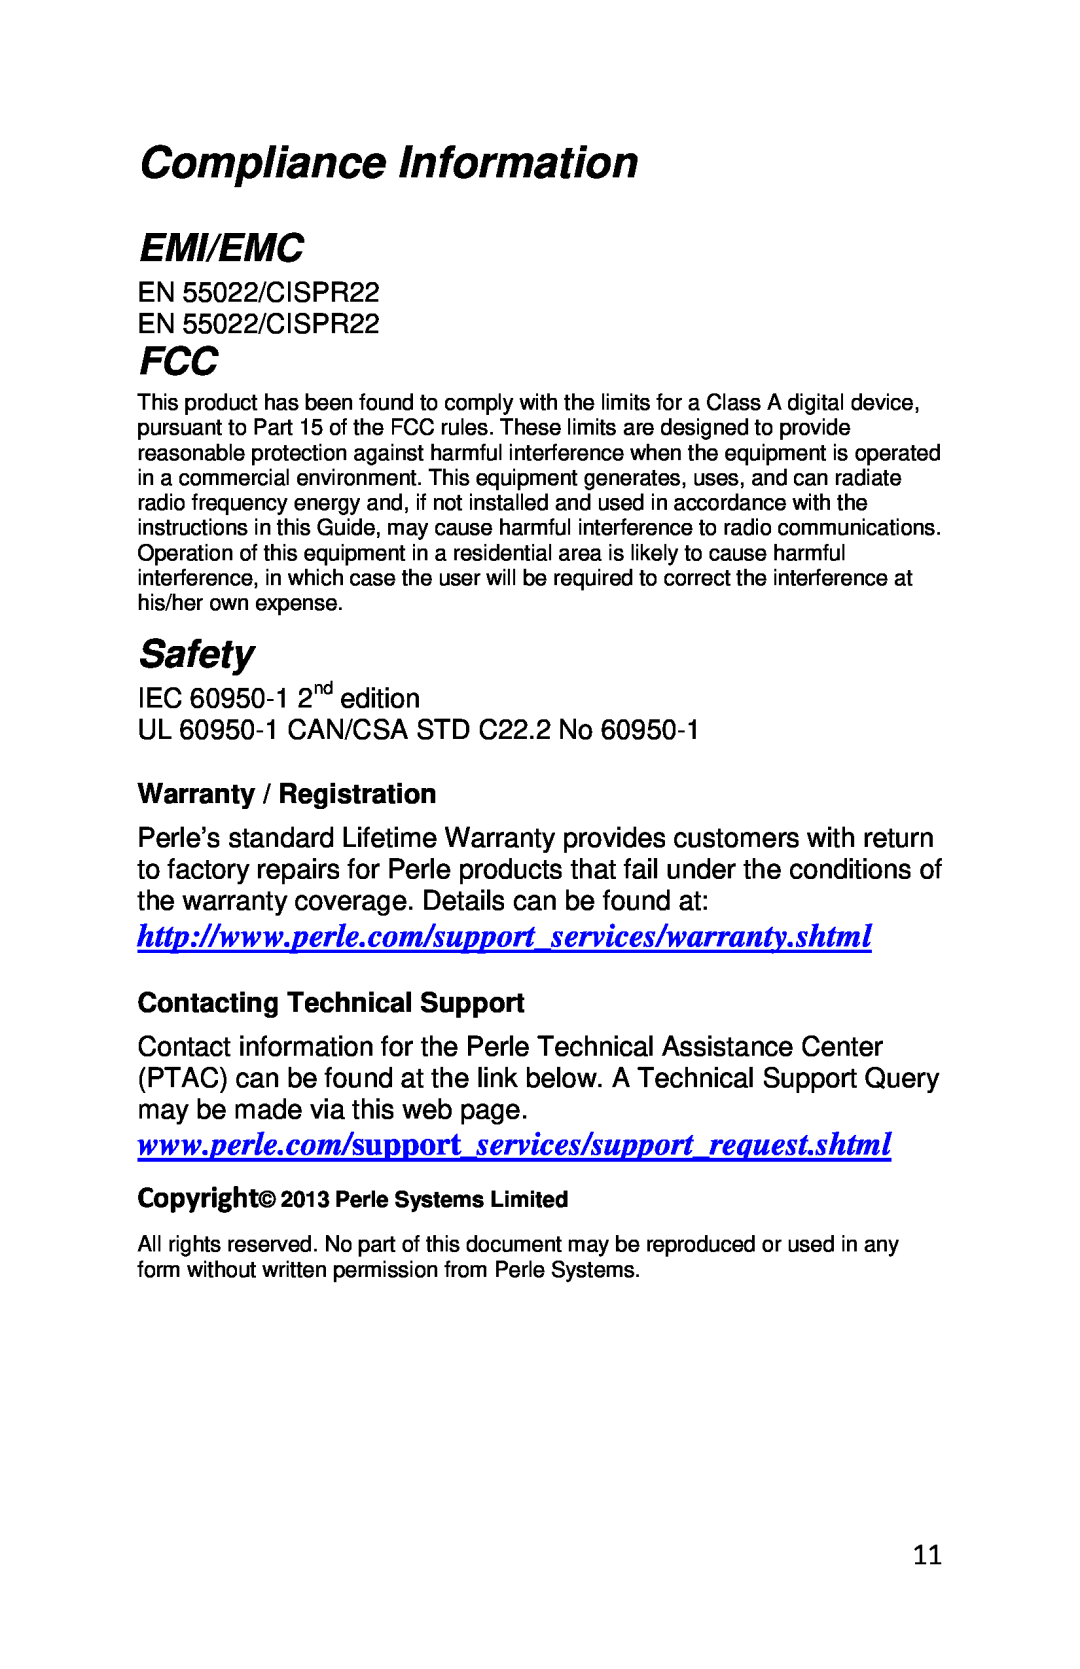 Perle Systems CM-4GPT-DSFP, C-4GPT-DSFP manual Emi/Emc, Safety, Compliance Information 